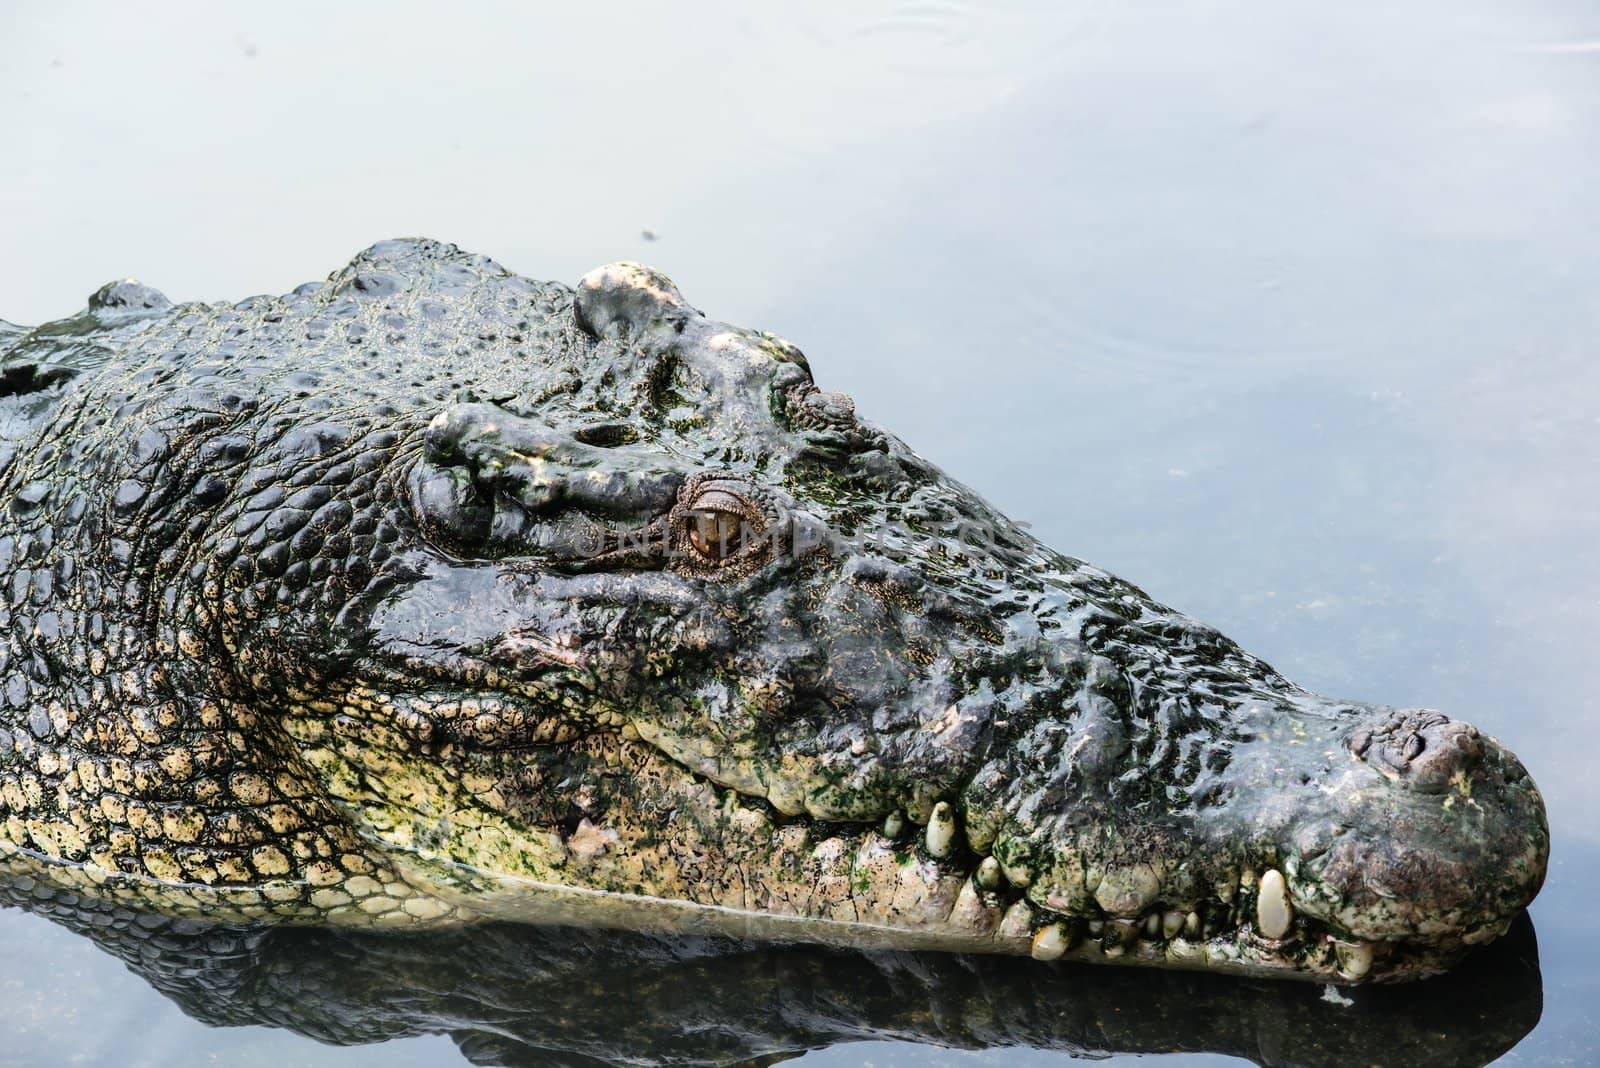 Large adult salt water crocodile in calm water close up, taken on a cloudy day 